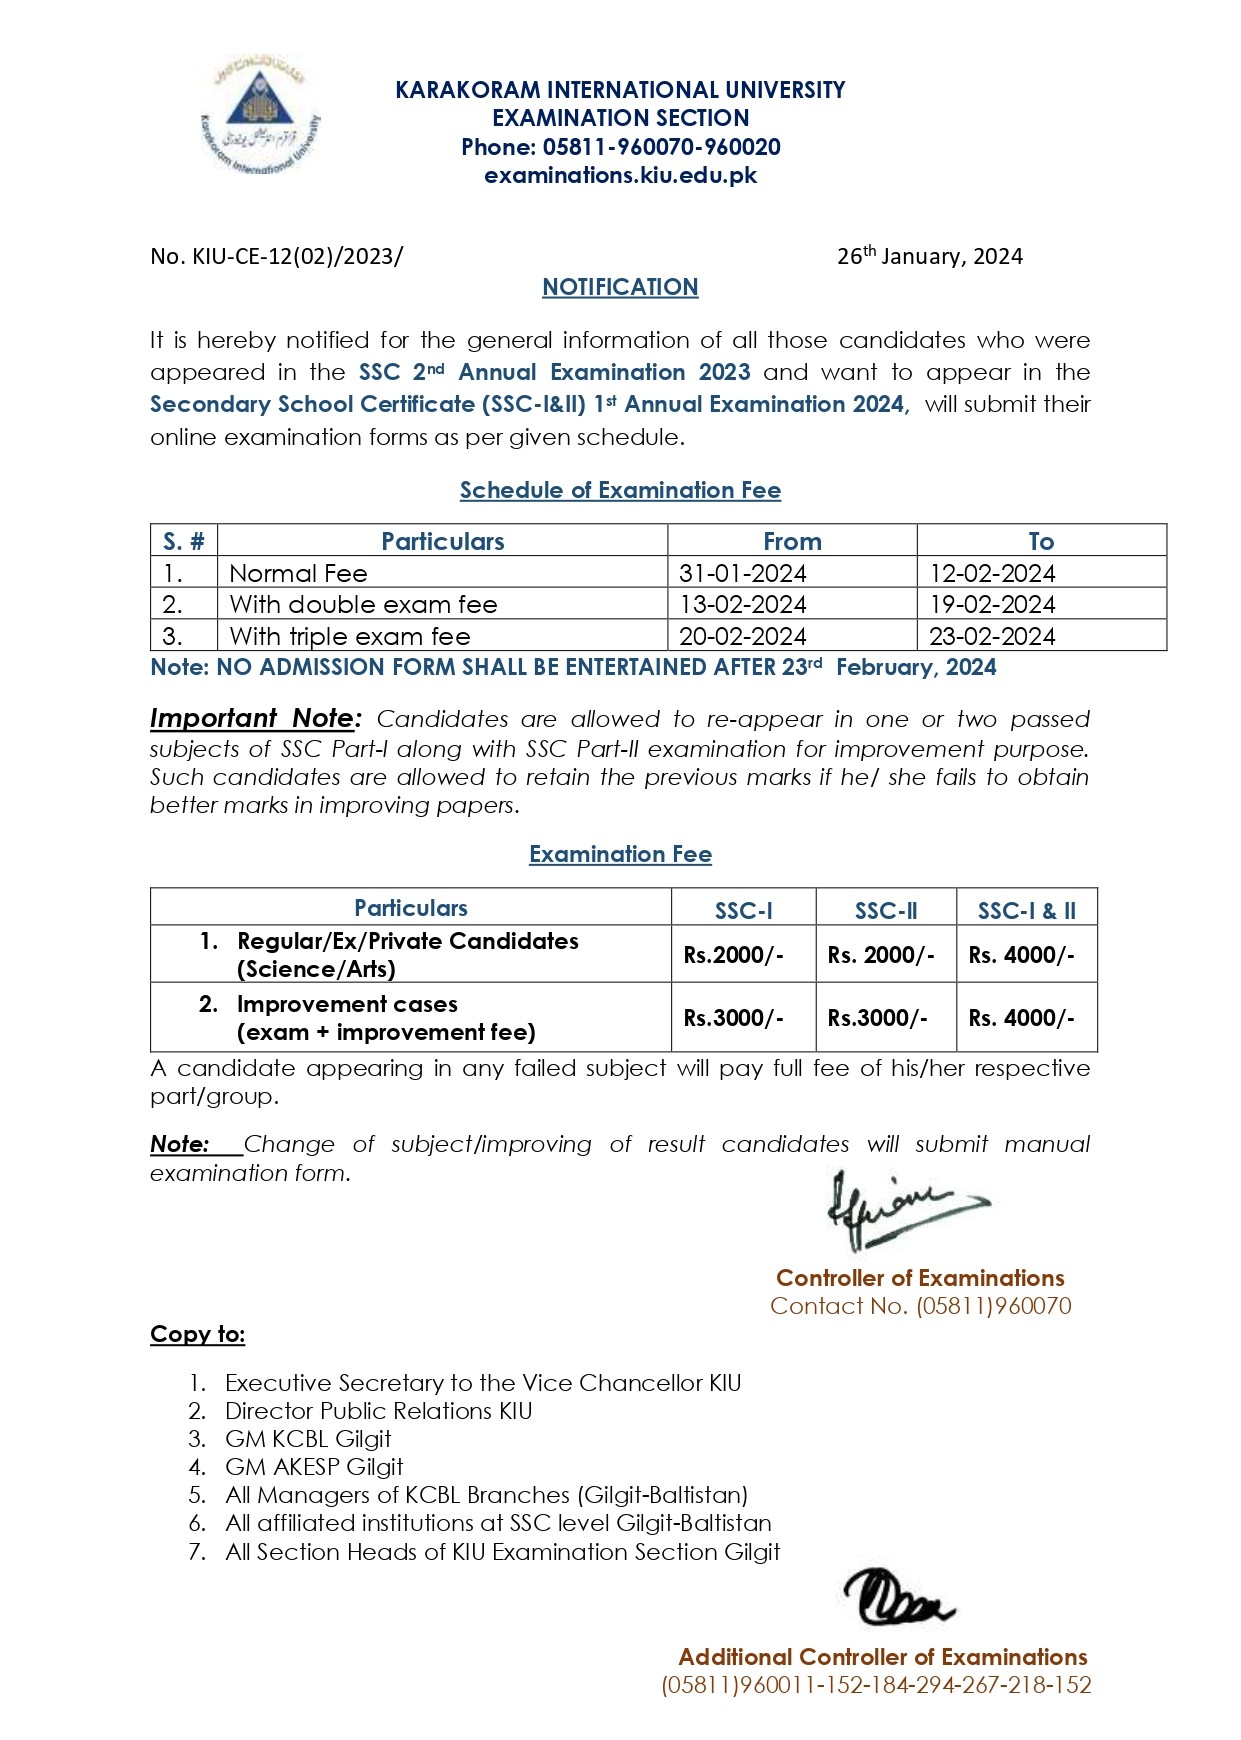 SSC First Annual Examination 2024 for students appeared in Second Annual Examination 2023